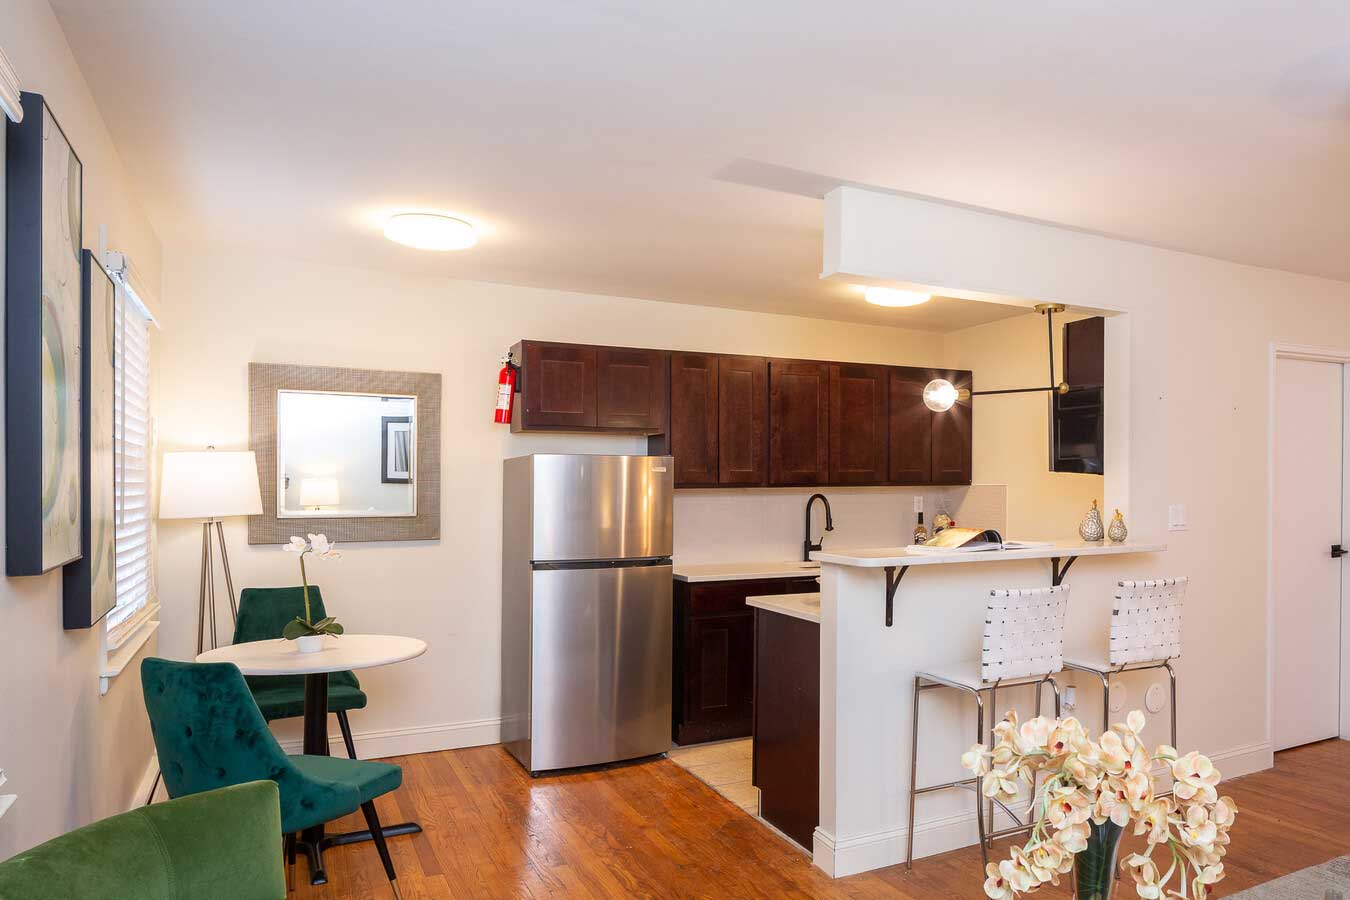 Kitchen at Livingston Gardens Apartments in North Brunswick Township, New Jersey